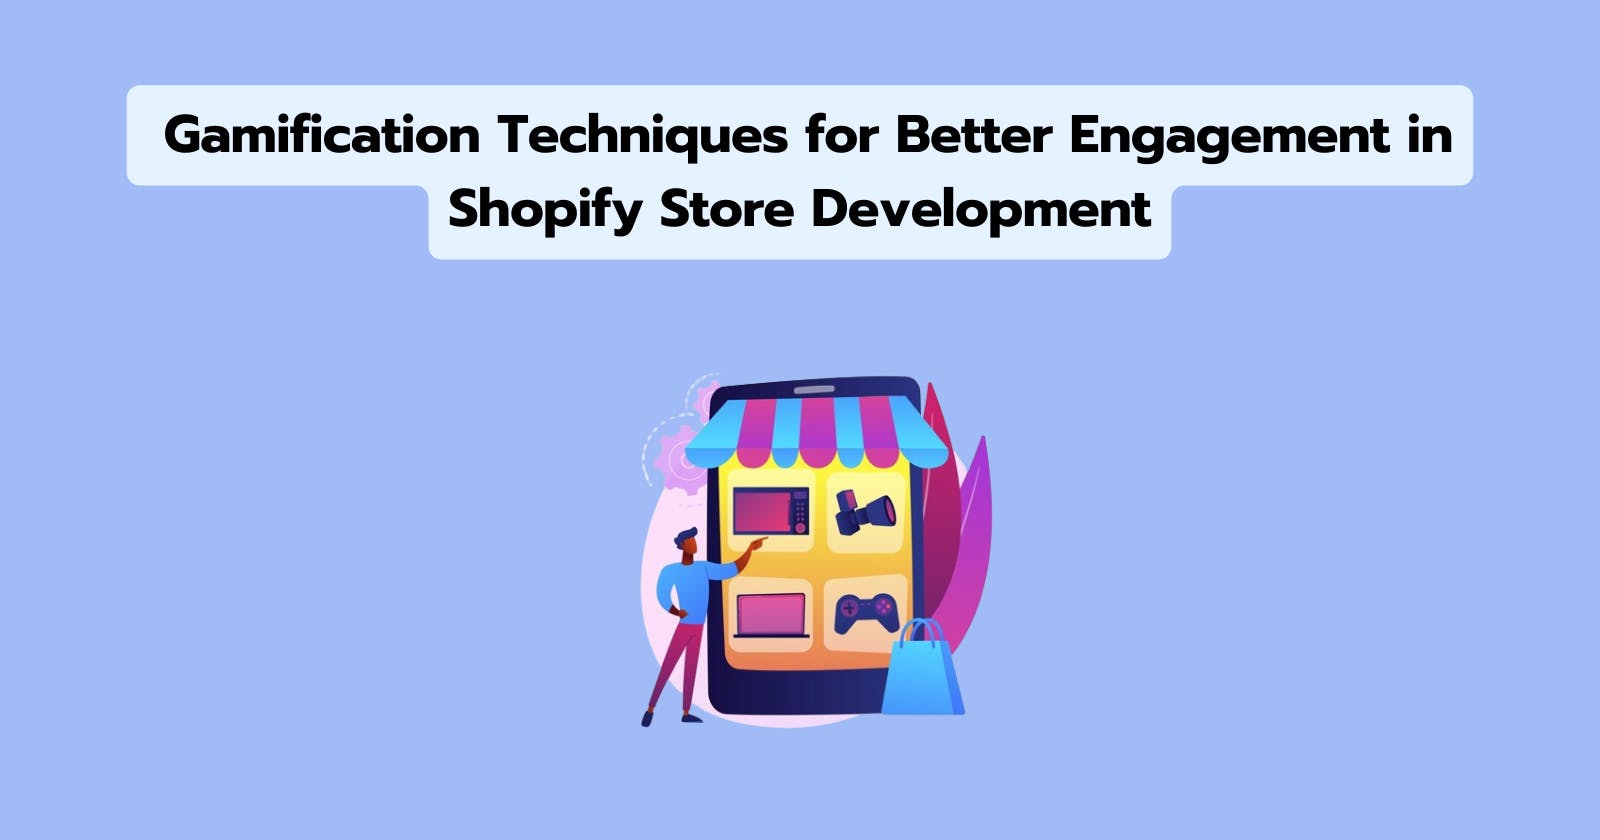 Gamify Your Store: Gamification Techniques for Better Engagement in Shopify Store Development